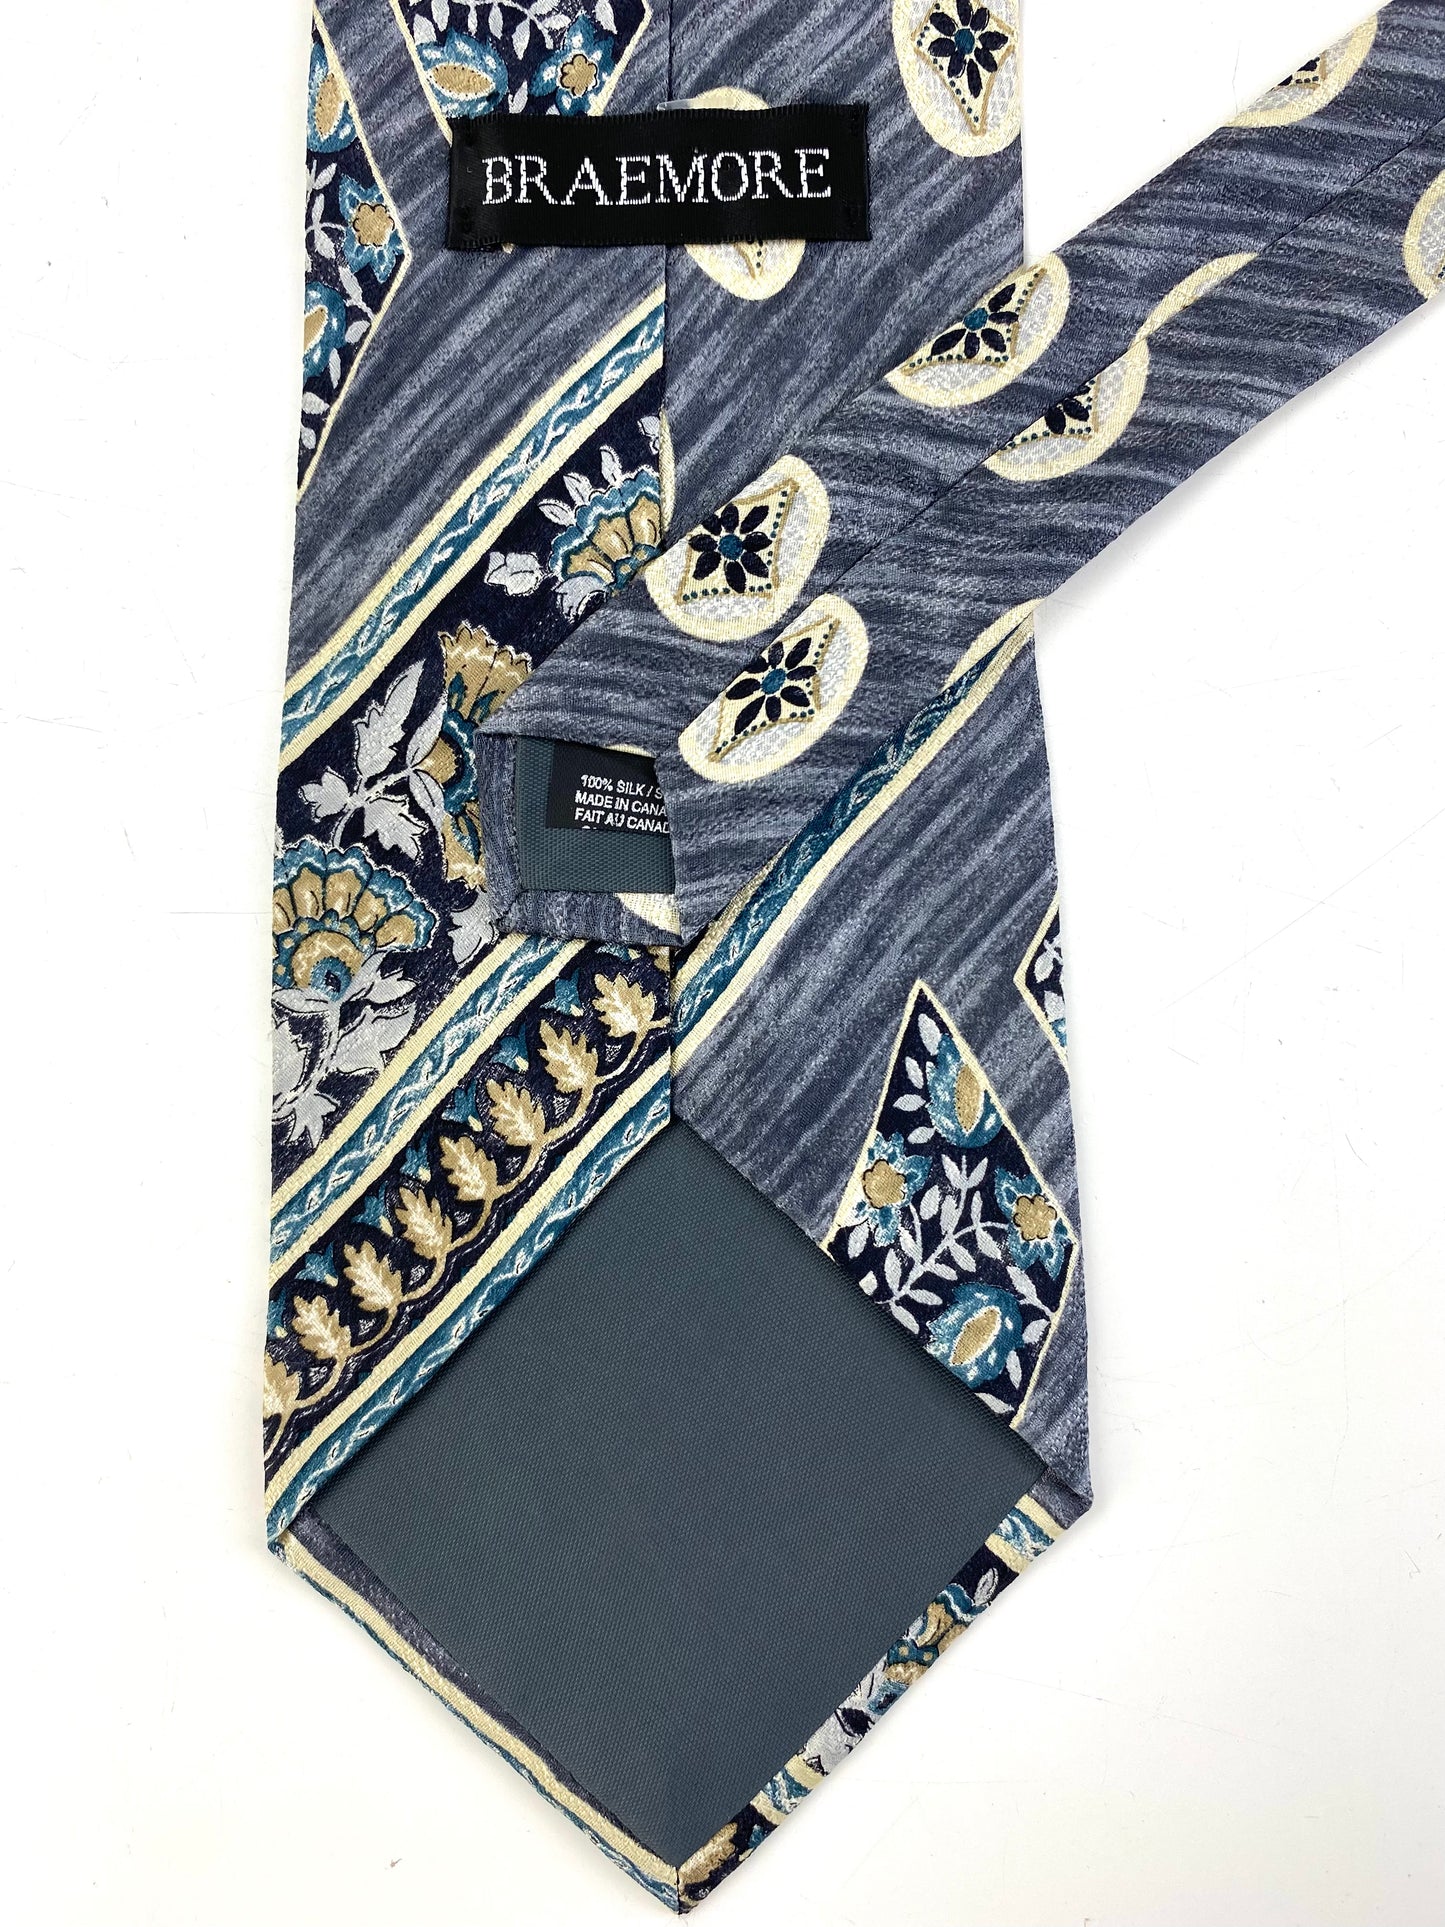 Back and labels of: 90s Deadstock Silk Necktie, Men's Vintage Grey/ Teal Abstract Botanical Pattern Tie, NOS